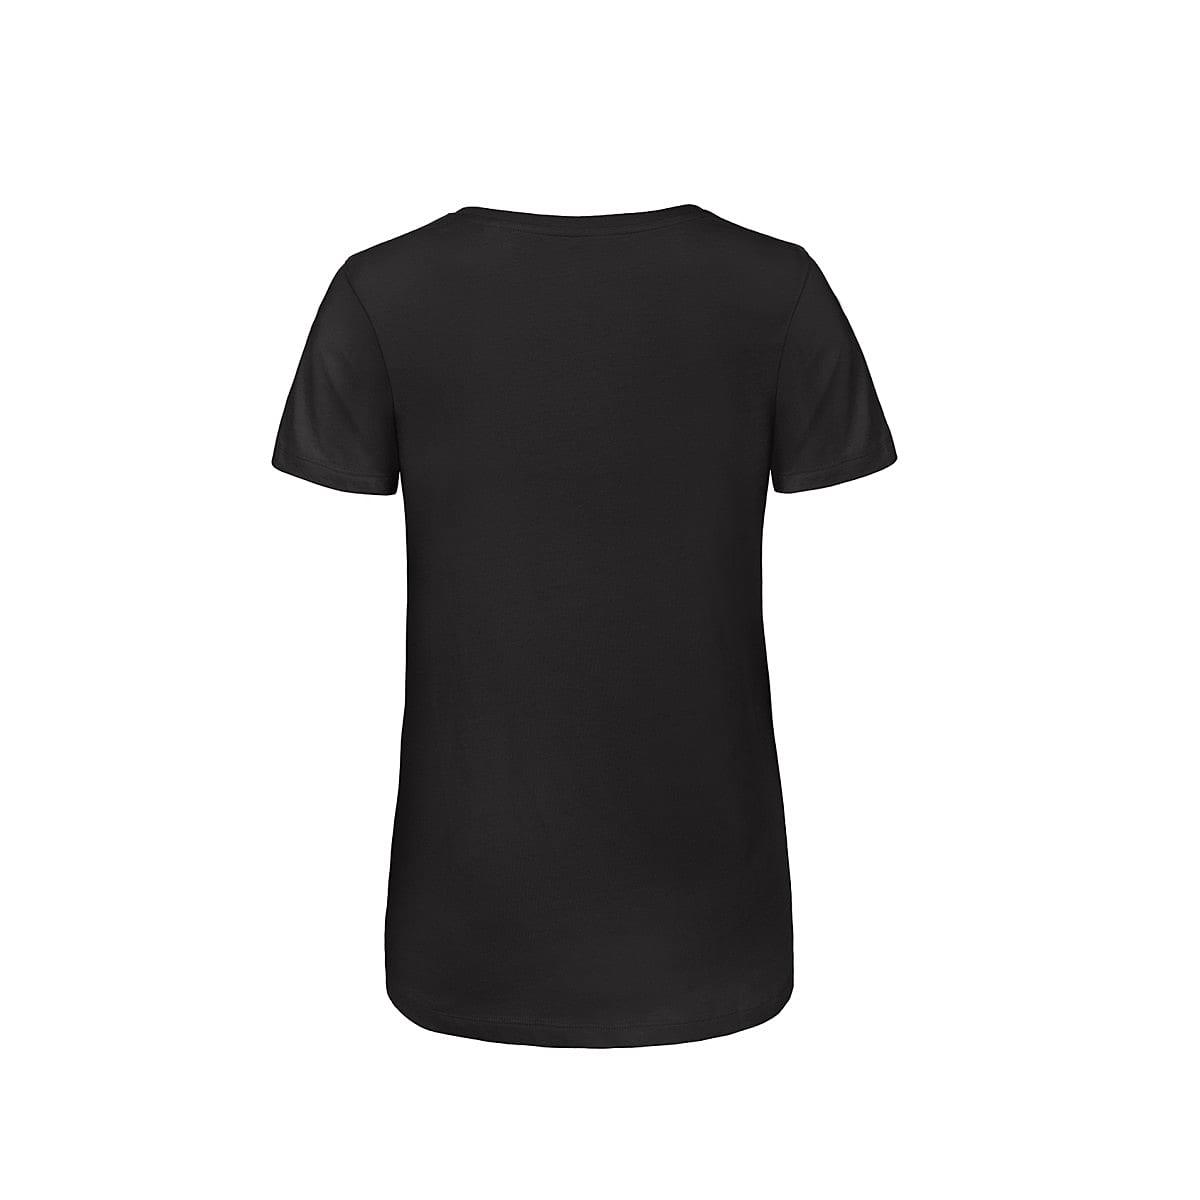 B&C Womens Inspire Triblend V-Neck T-Shirt in Black (Product Code: TW058)